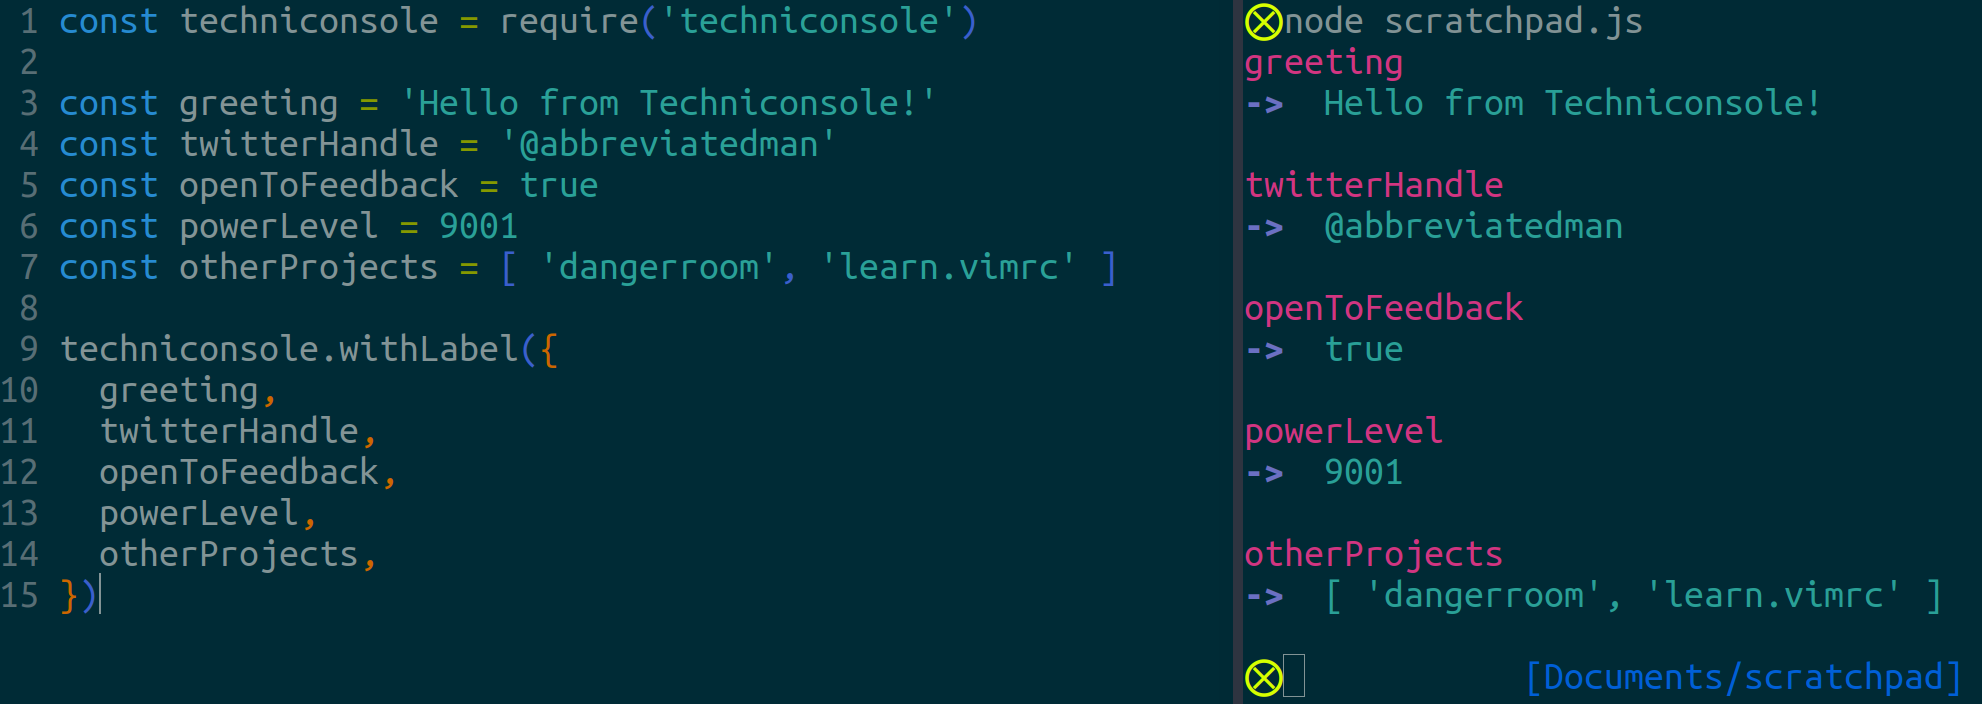 a screenshot of sevearl values being passed into `withLabel` using object property shorthand syntax